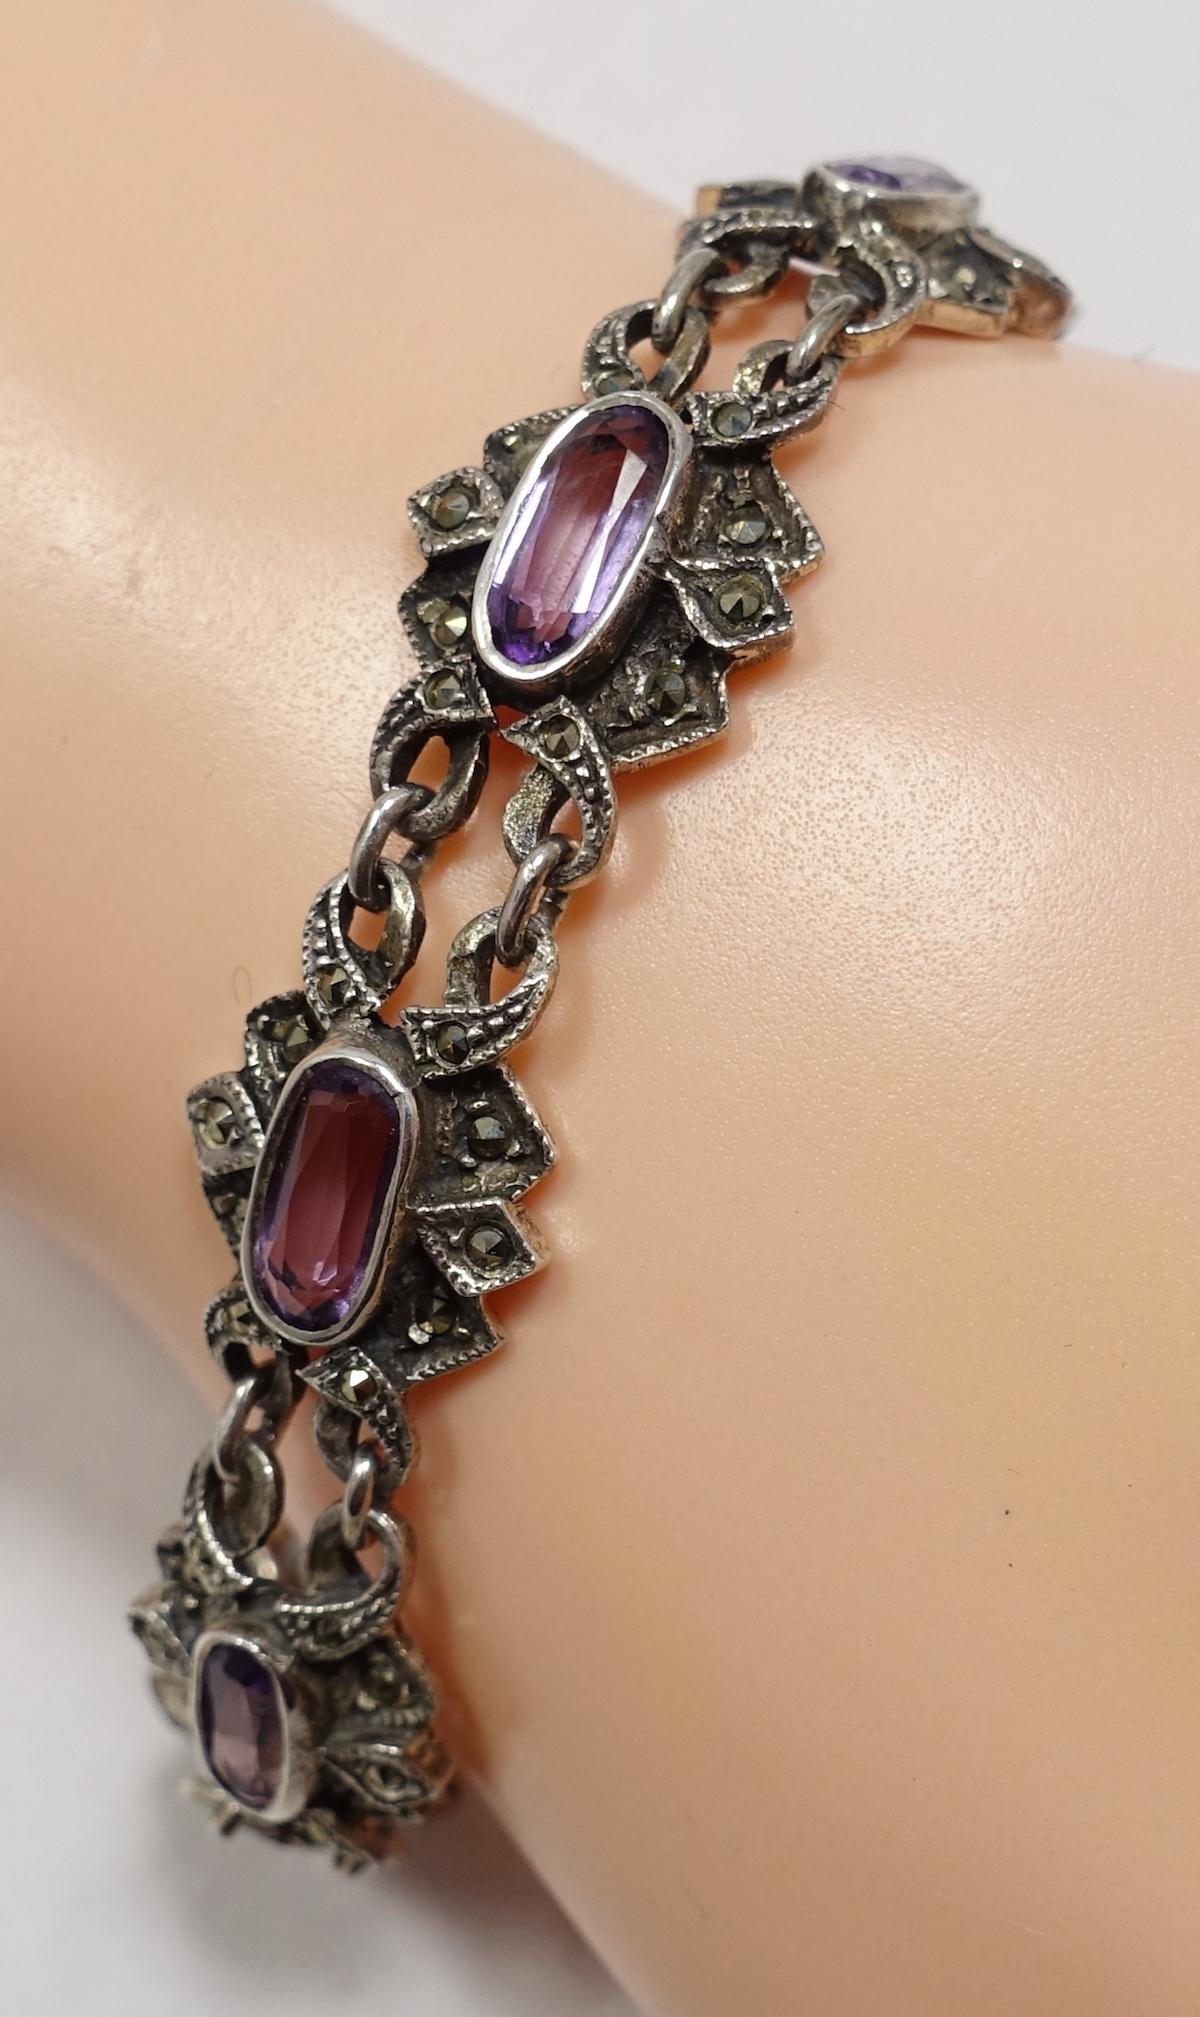 This vintage sterling silver bracelet has elongated amethyst stones in a marcasite with an open link design. This bracelet measures 7-1/2” x 3/4” with a fold-over clasp and is in excellent condition.